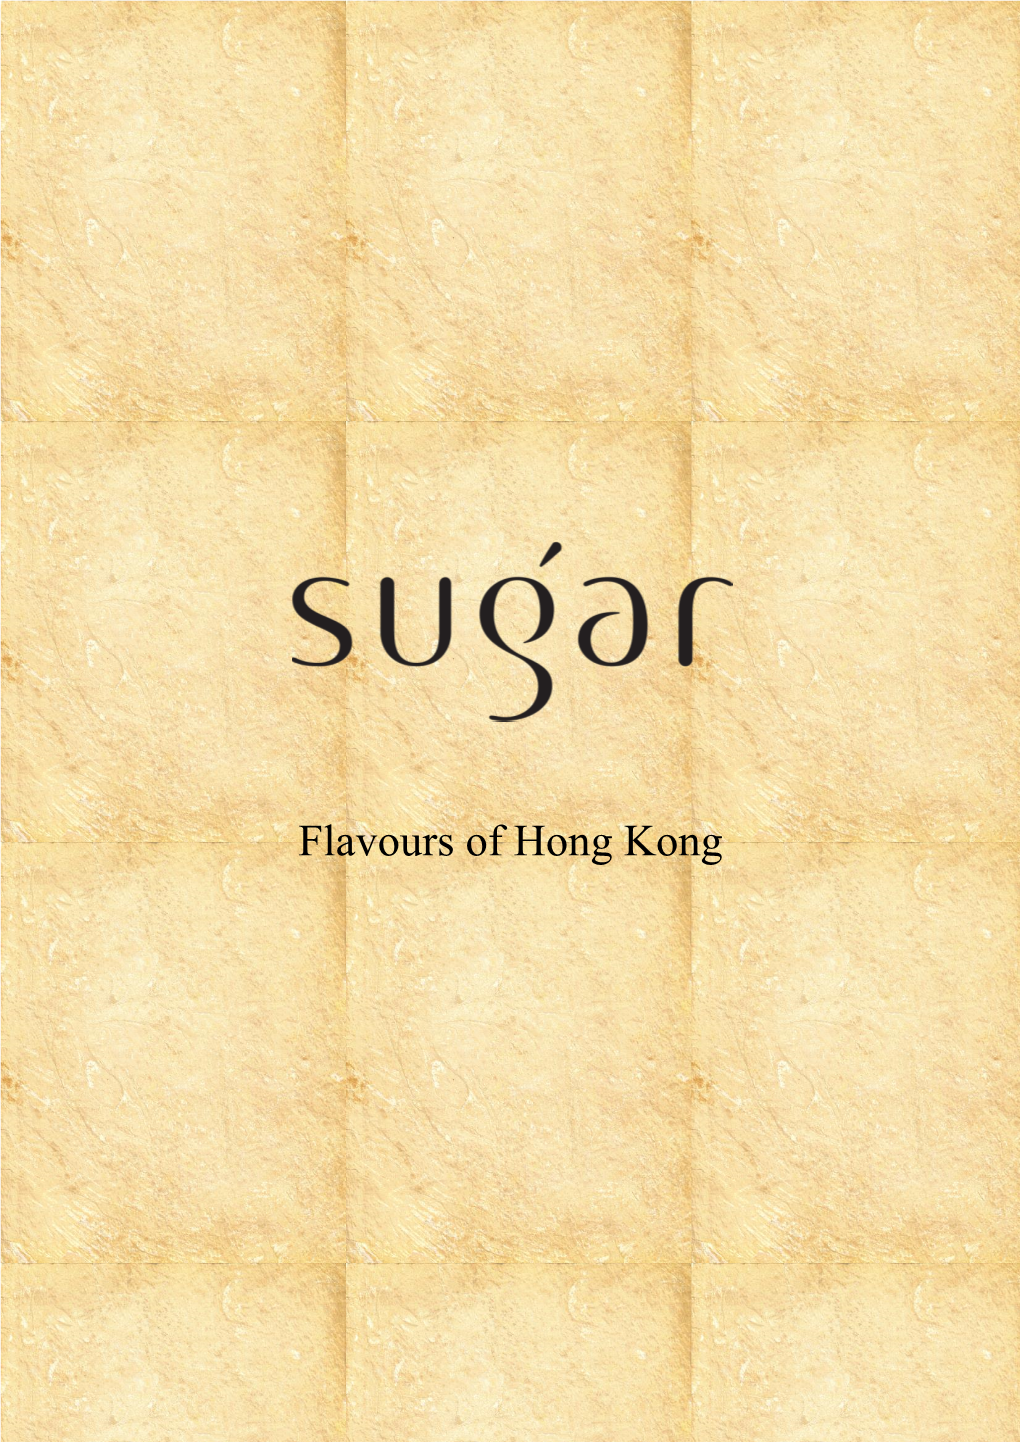 Flavours of Hong Kong